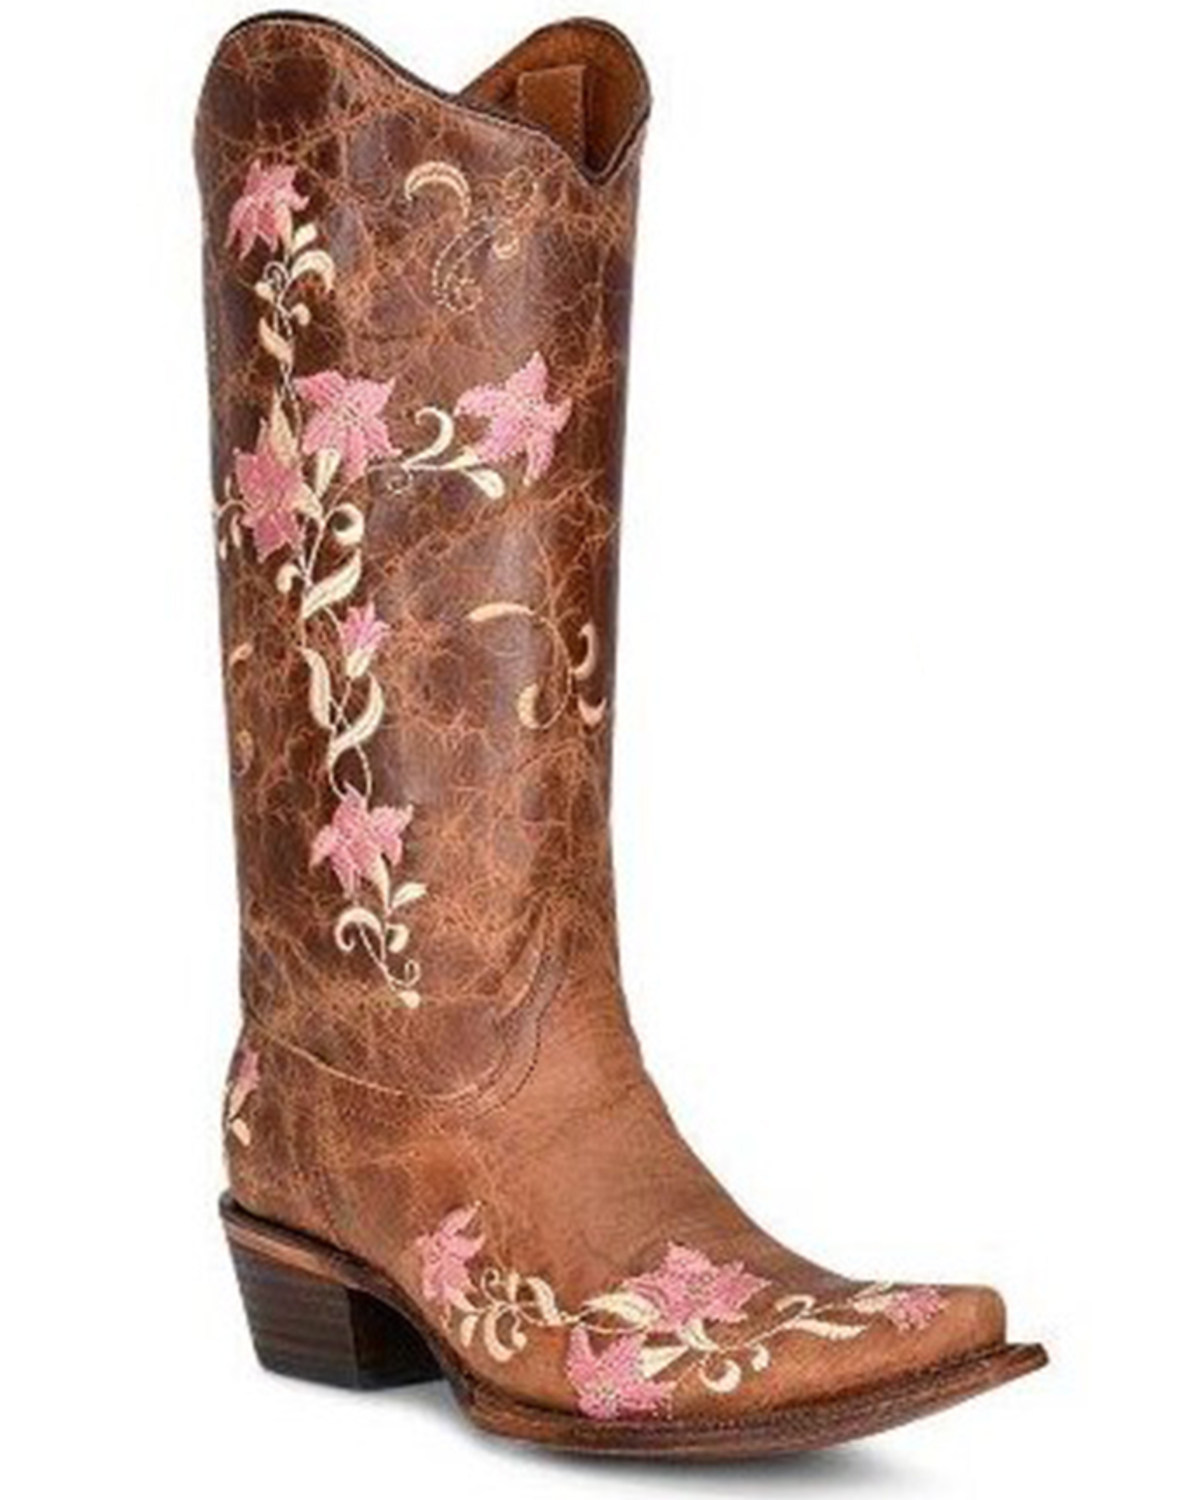 Corral Women's Floral Embroidered Tall Western Boots - Snip Toe